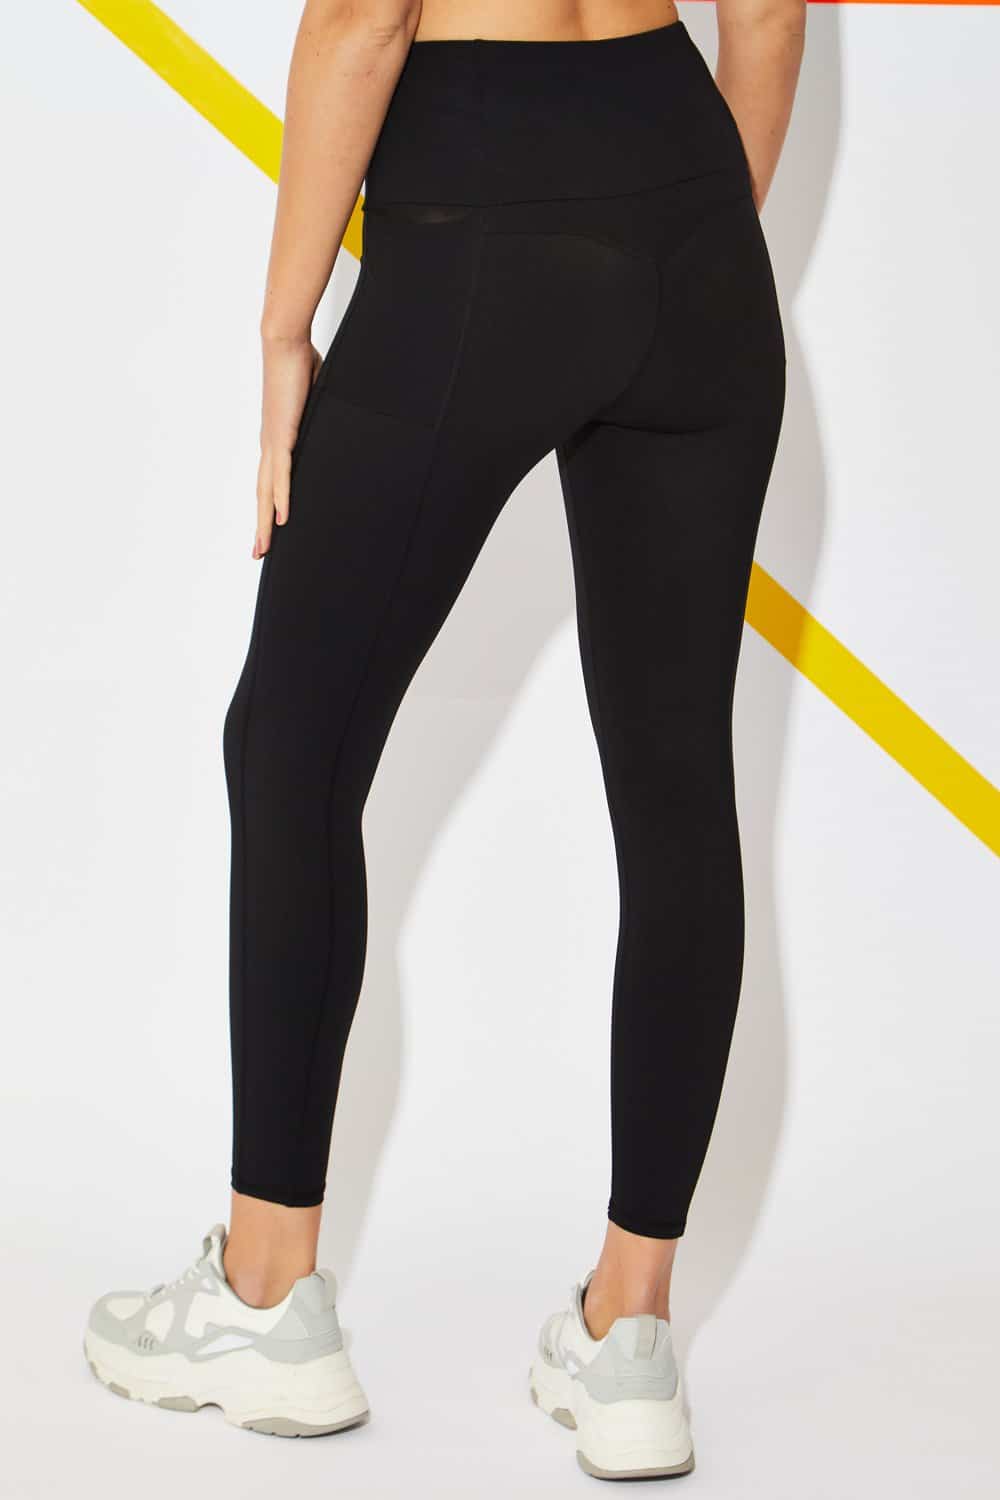  NEW YOUNG 3 Pack Leggings